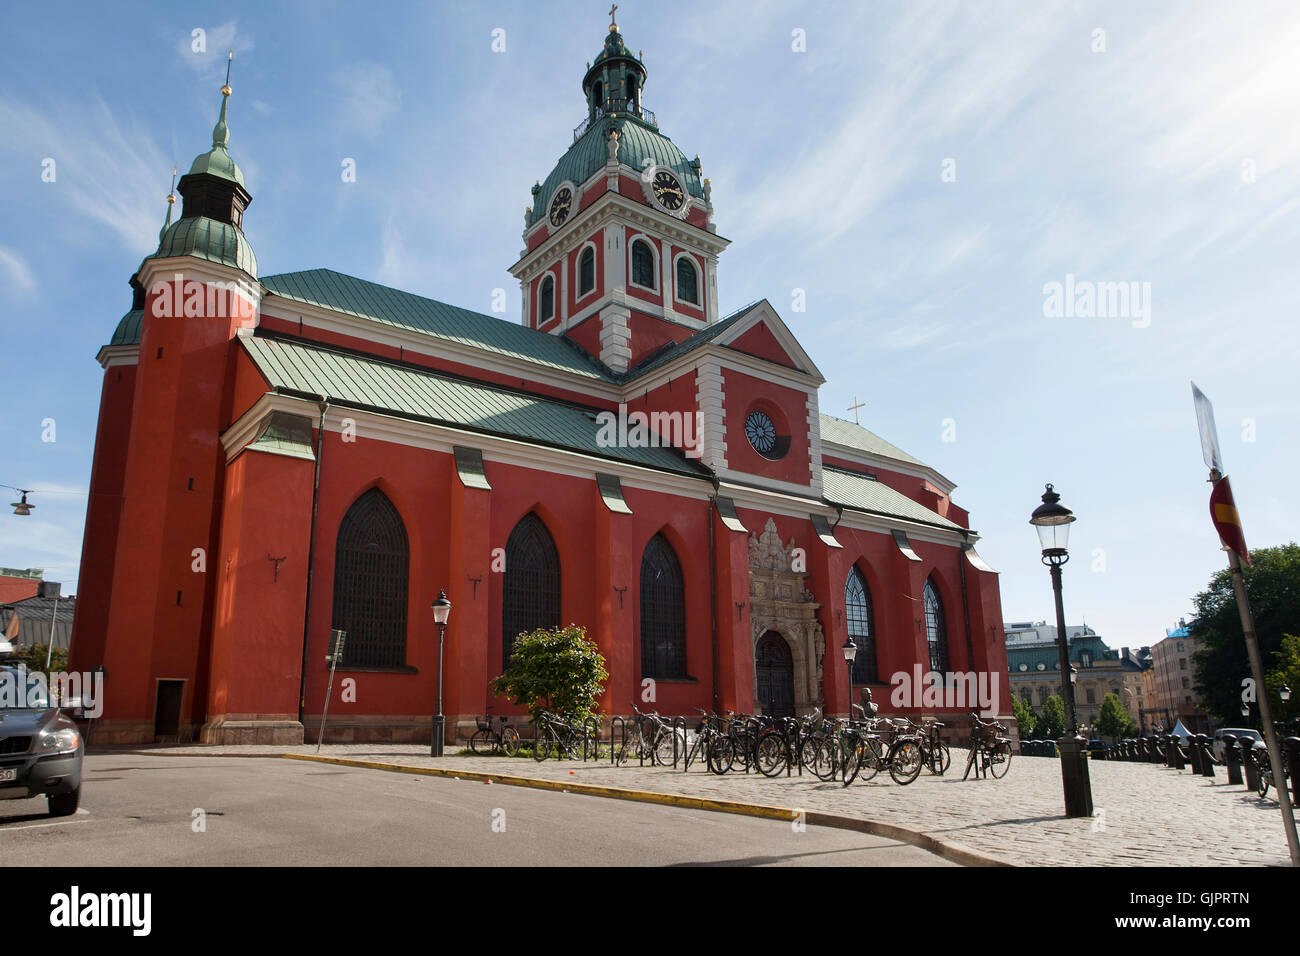 St Jacobs kyrka, St James' Church, a red church with a green copper roof at Jakobs torg,  Kungsträdgården in Stockholm Sweden. Stock Photo